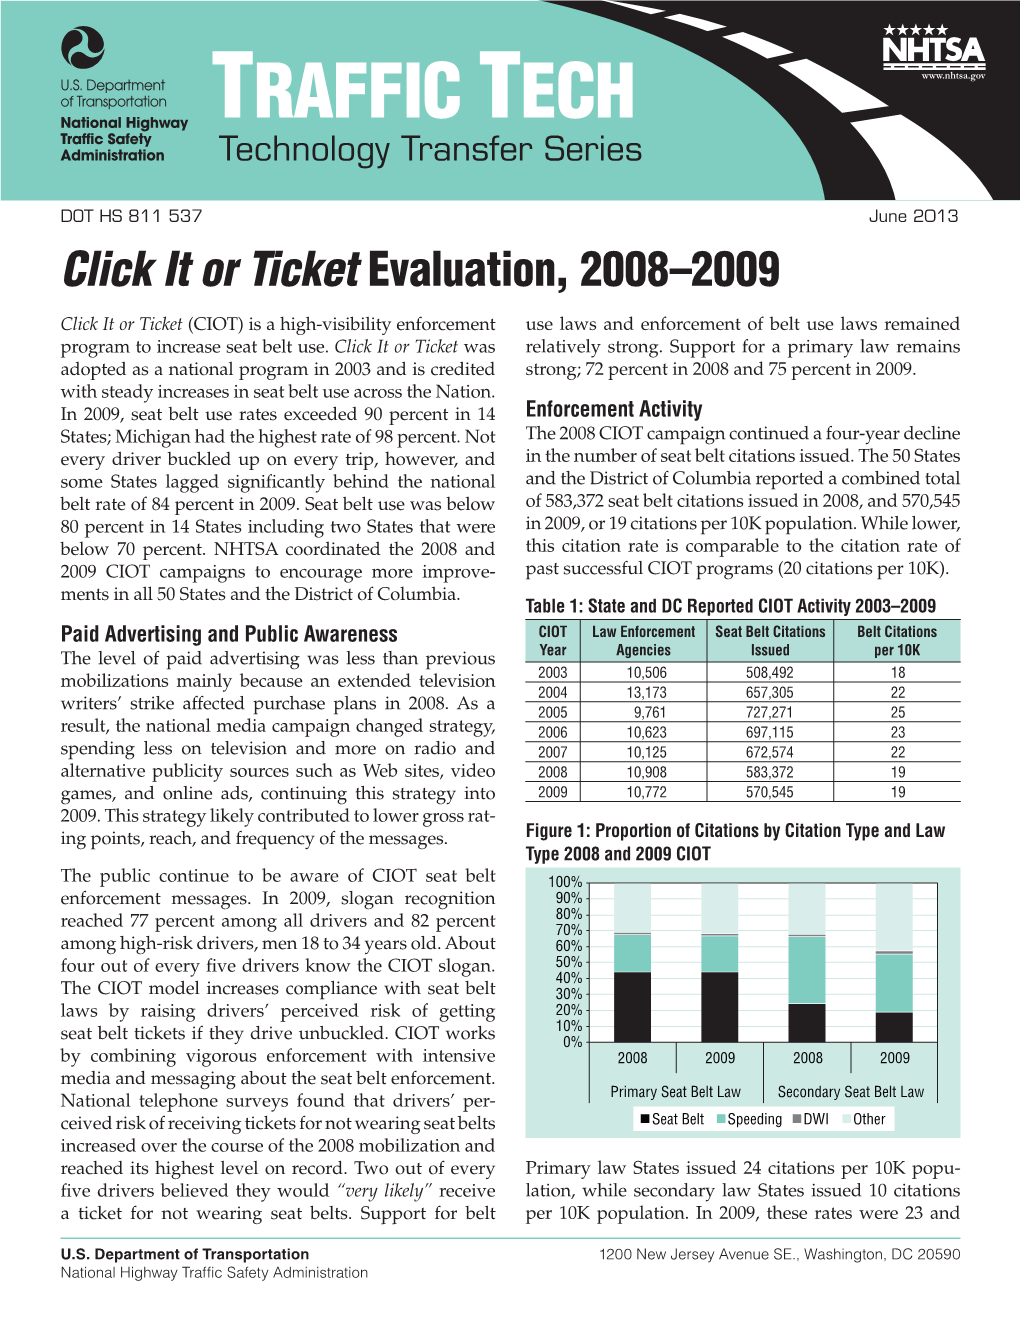 Traffic Tech: "Click It Or Ticket" Evaluation, 2008–2009